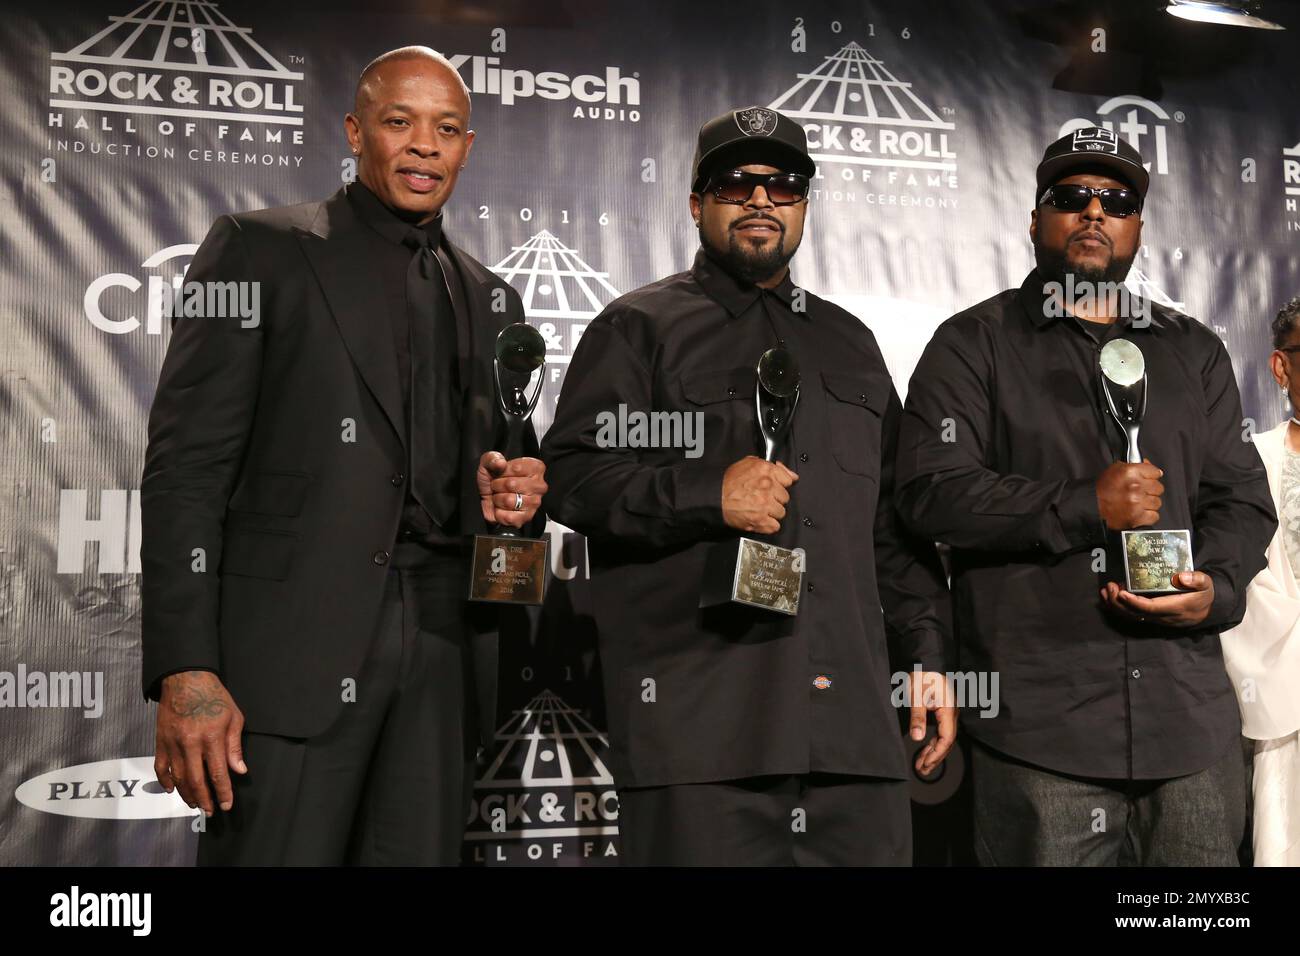 CLEVELAND, OHIO – OCTOBER 30: Cut Creator, Dr. Dre, E-Love, Eminem, LL Cool  J and DJ Z-Trip pose backstage during the 36th Annual Rock & Roll Hall Of  Fame Induction Ceremony at